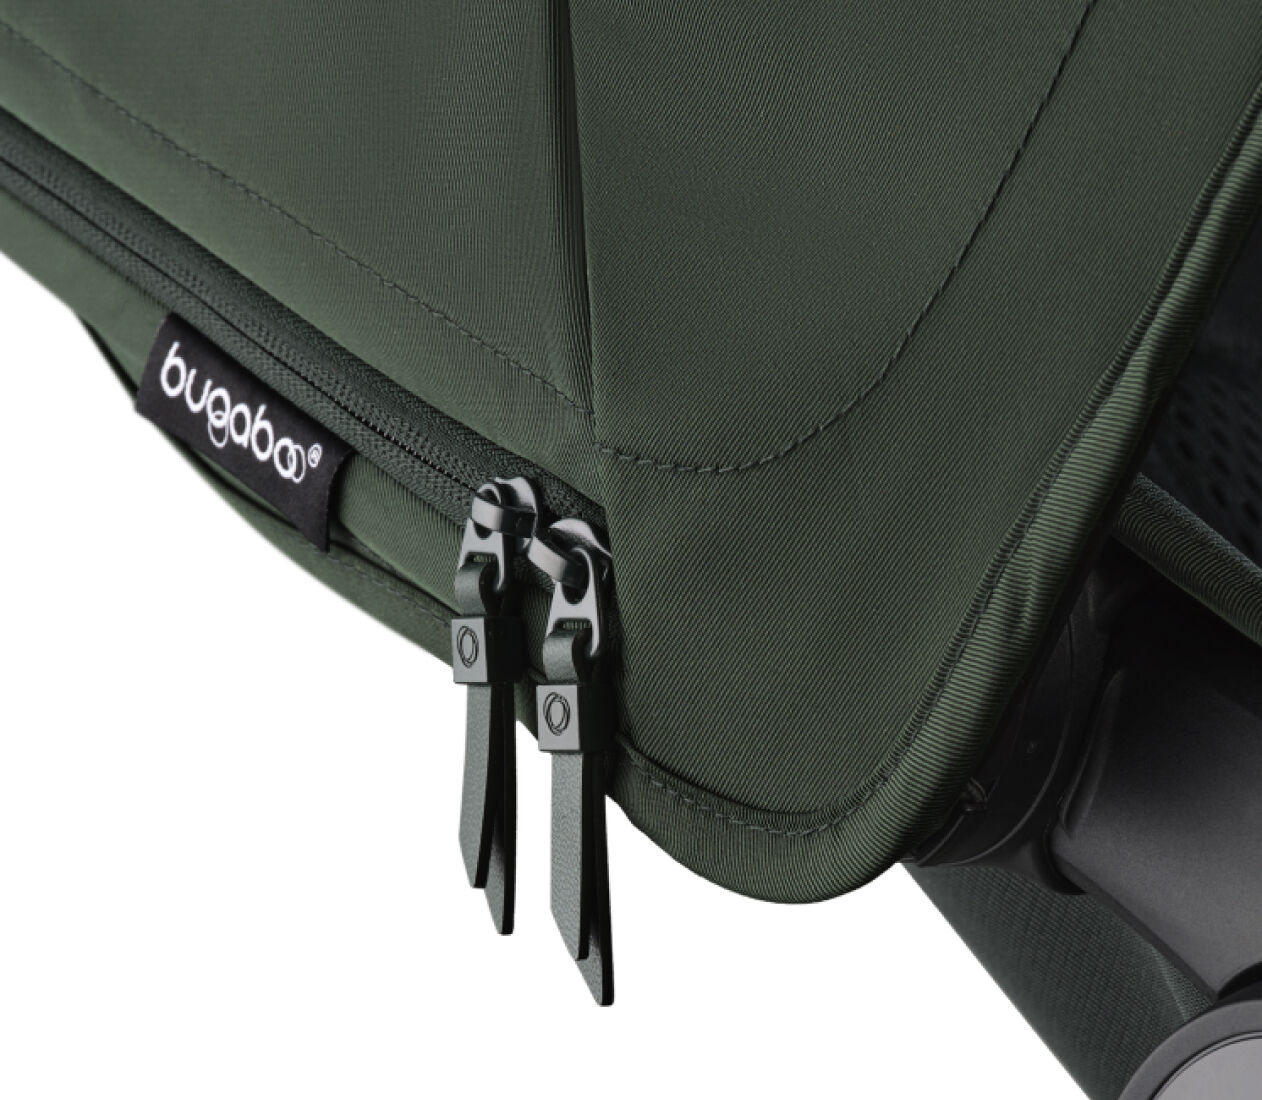 Close up on a Bugaboo sun canopy, with focus on the zippers and the Bugaboo brand label.